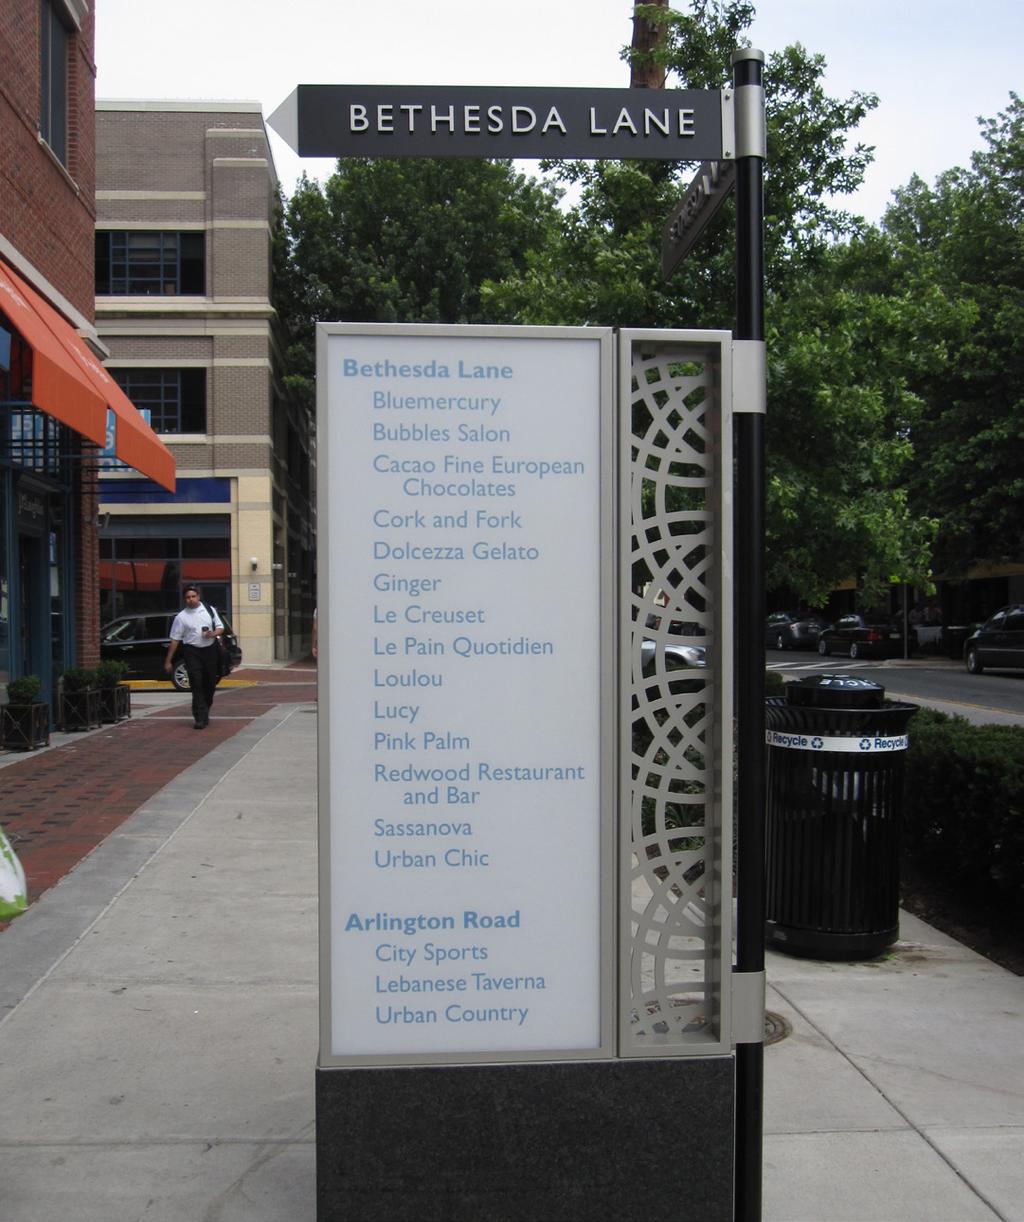 ADDITIONAL PLACEMAKING ELEMENTS 6A SIGNAGE AND WAYFINDING IN THE PUBLIC REALM LEFT Distinctive street and wayfinding sign with stores listed by location Image Credit: Fairfax County Wayfinding